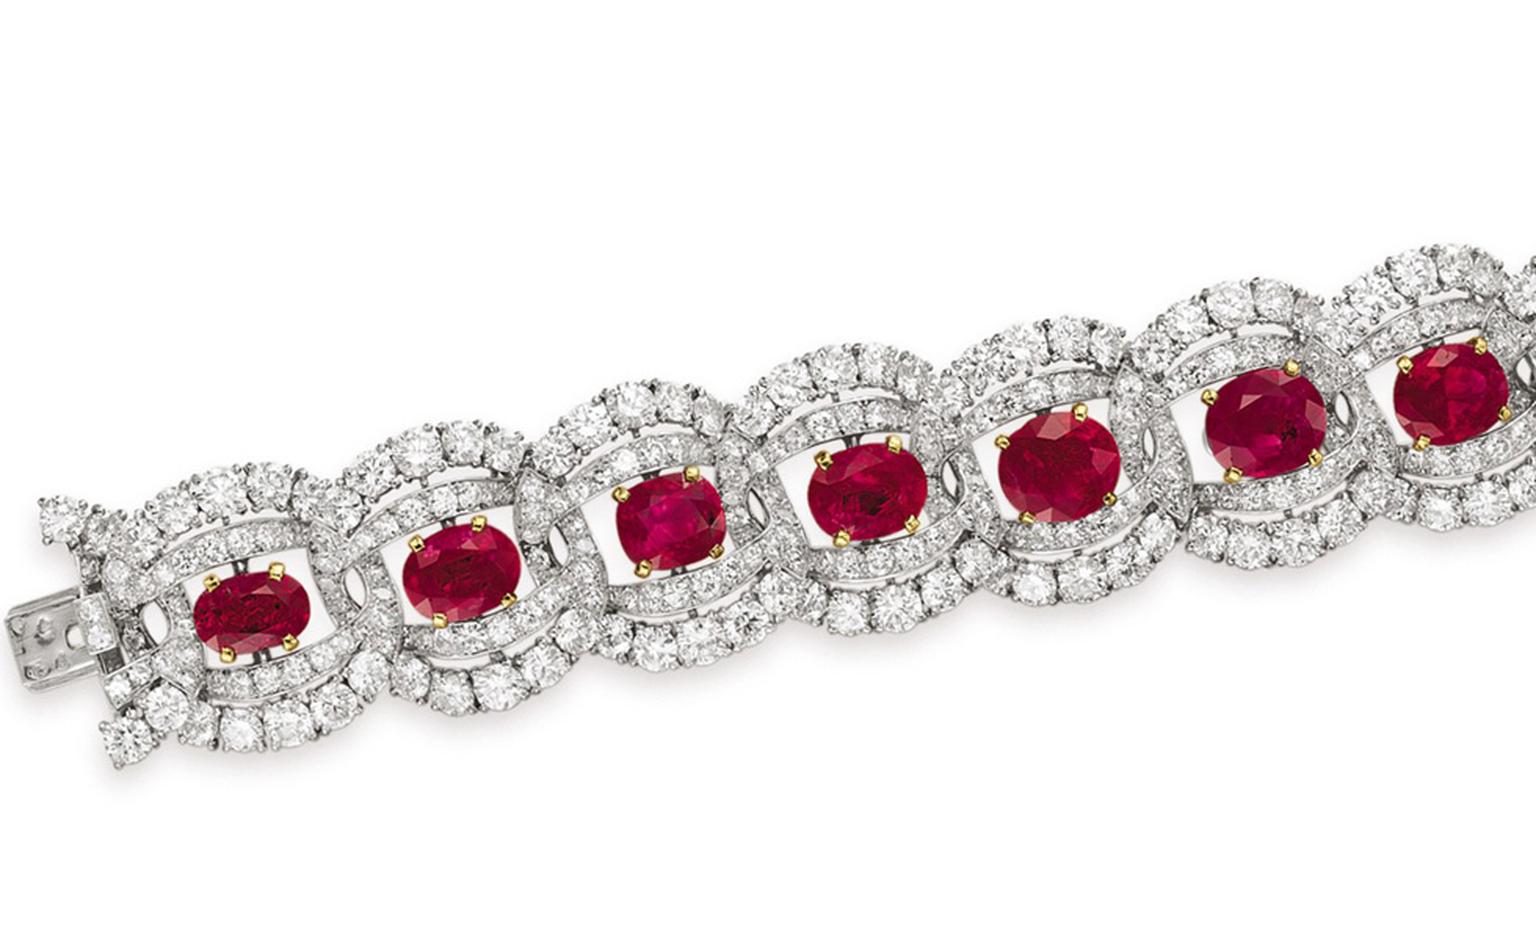 Liz Taylor's jewellery revealed at Christie's | The jewellery Editor